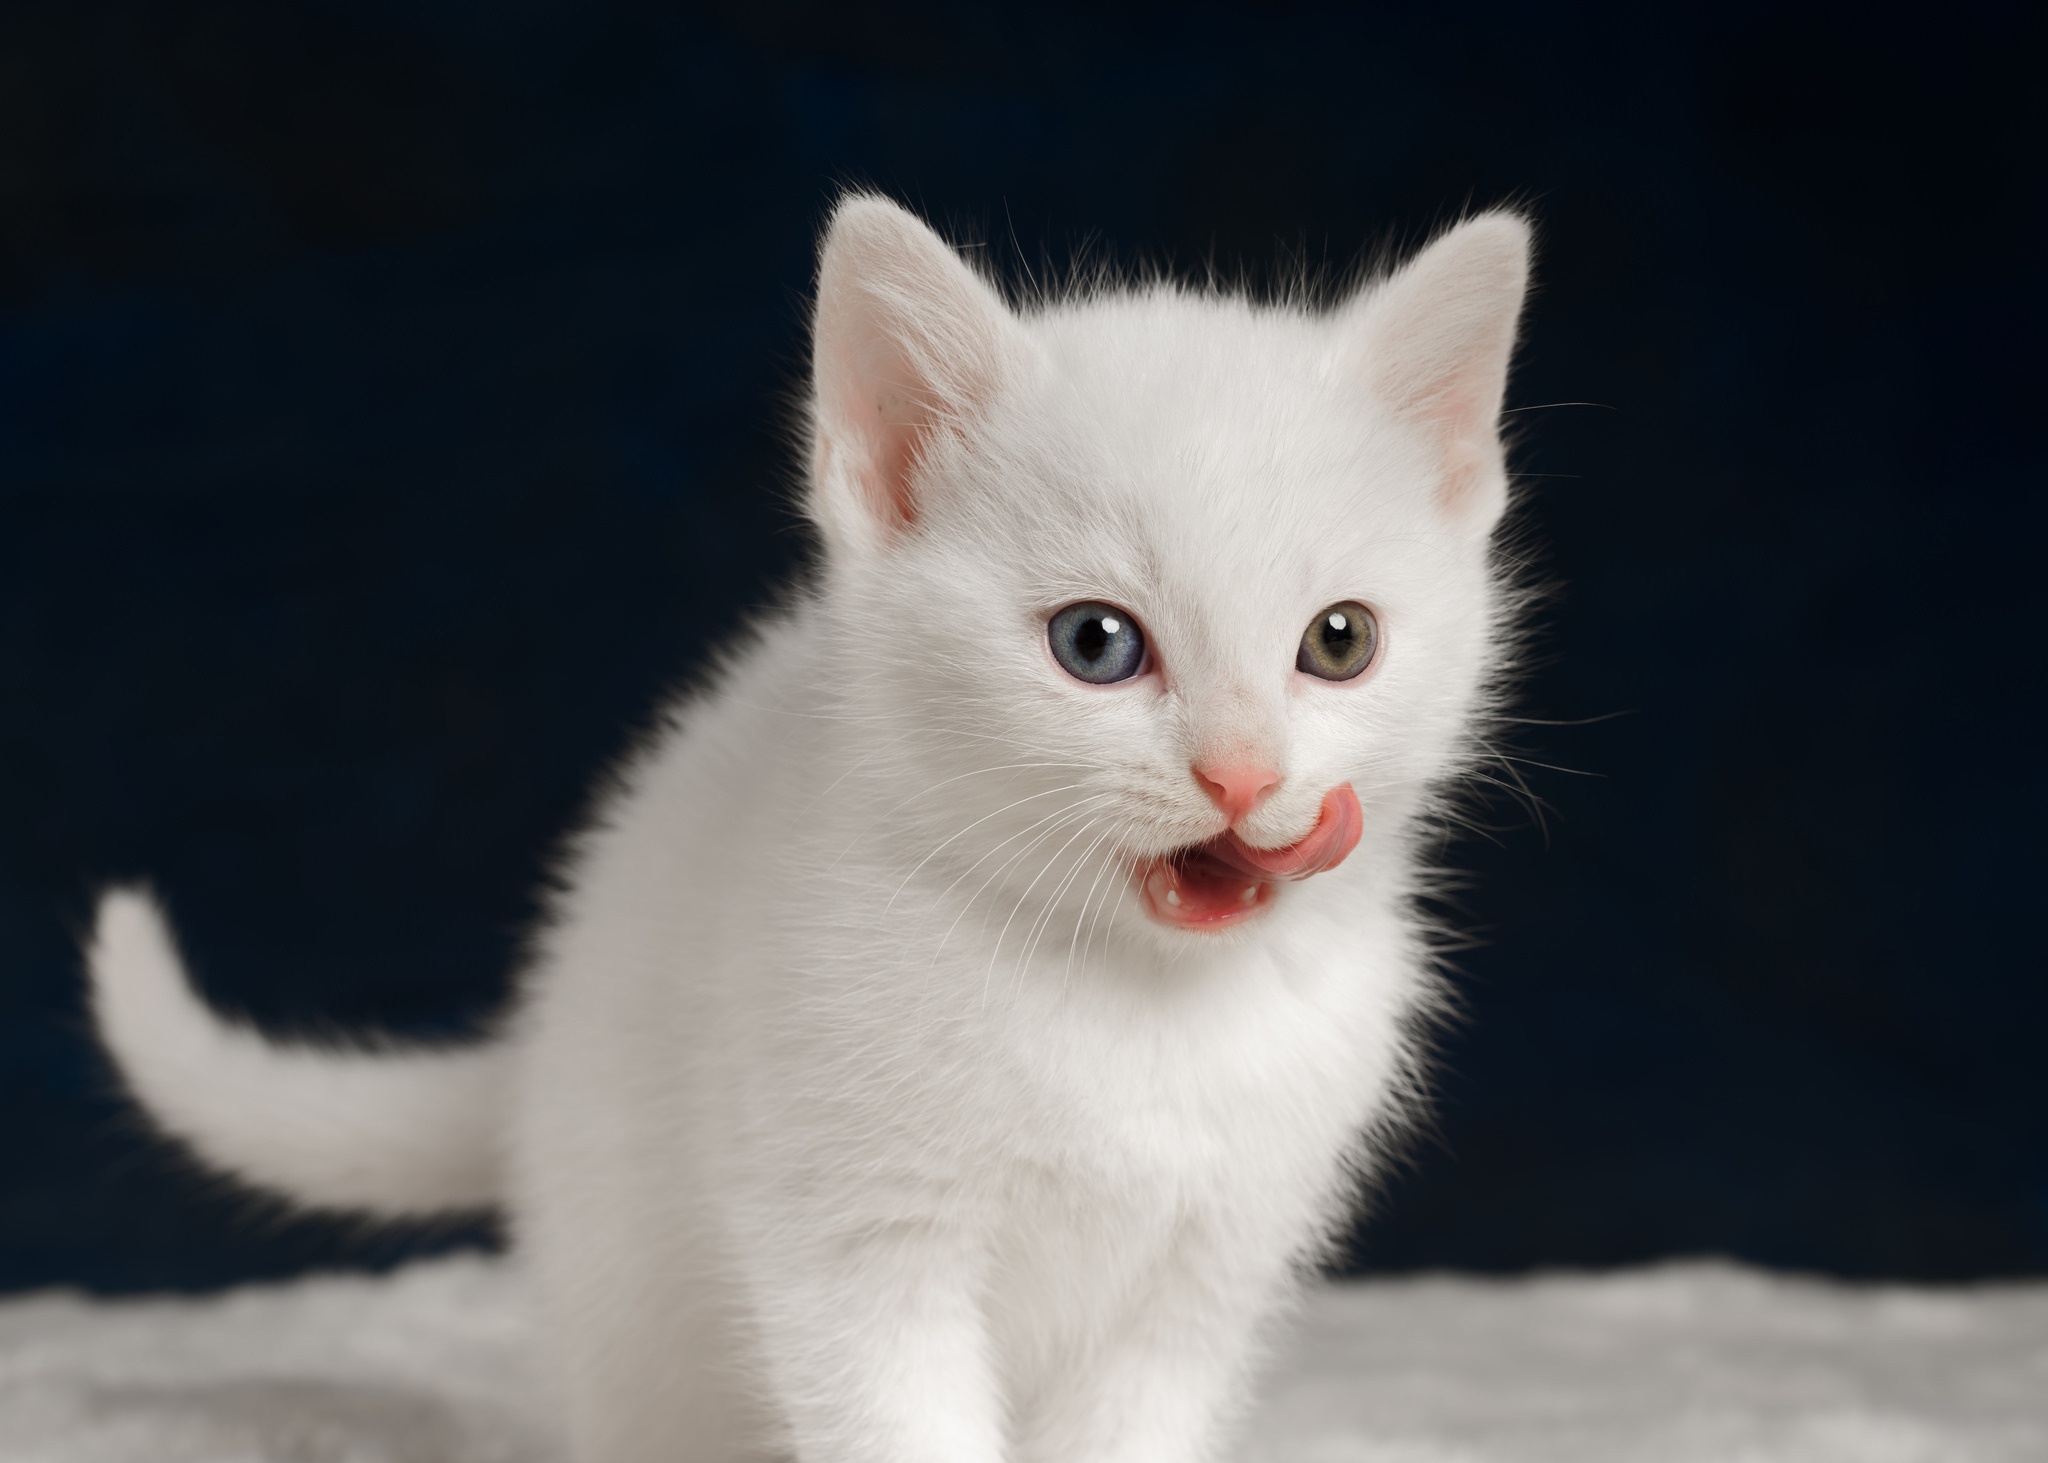 General 2048x1463 kittens white tongues animals cats baby animals tongue out heterochromia